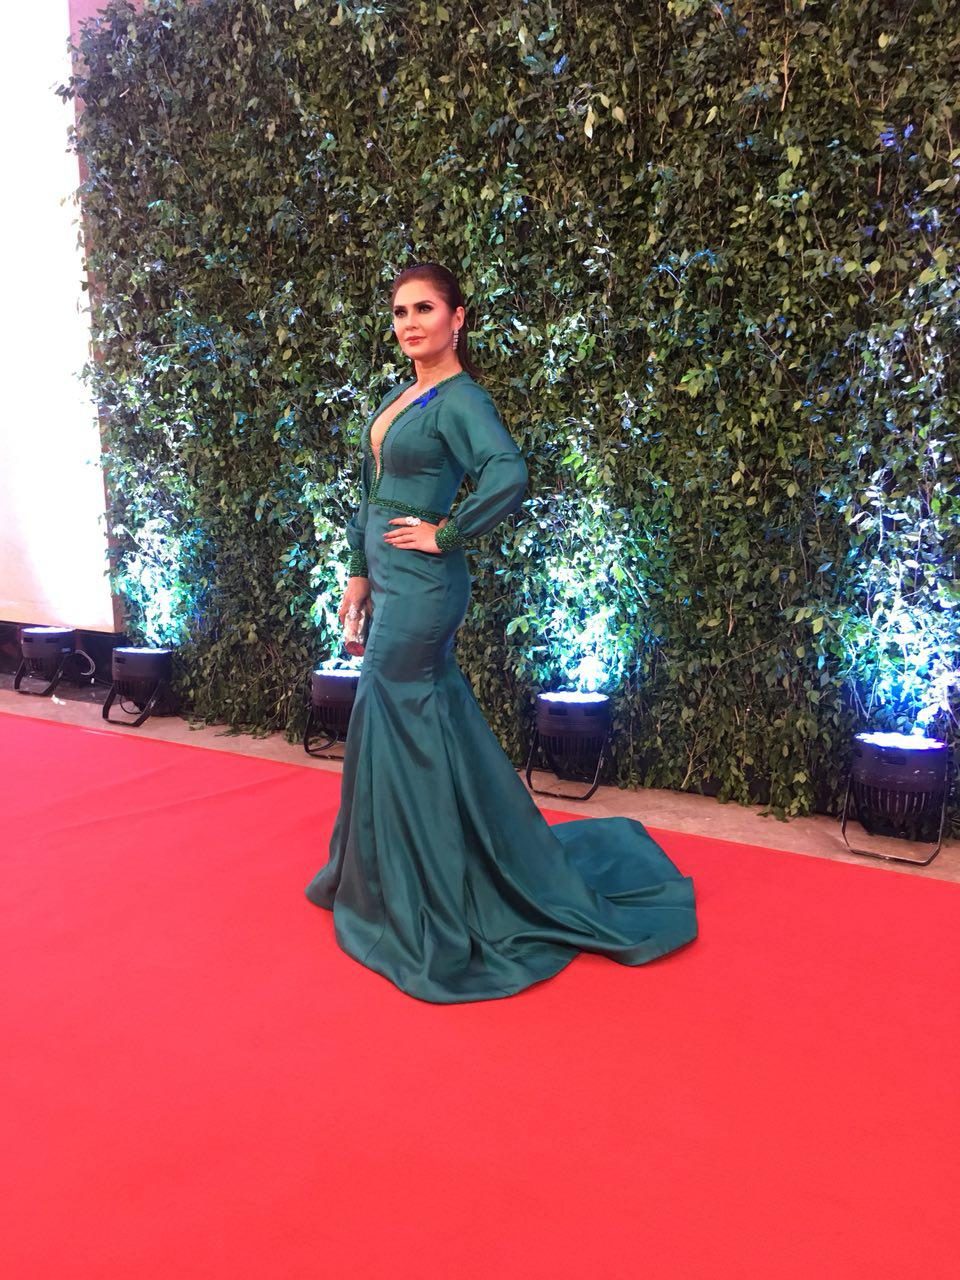 IN PHOTOS: All the looks at the ABS-CBN Ball 2018